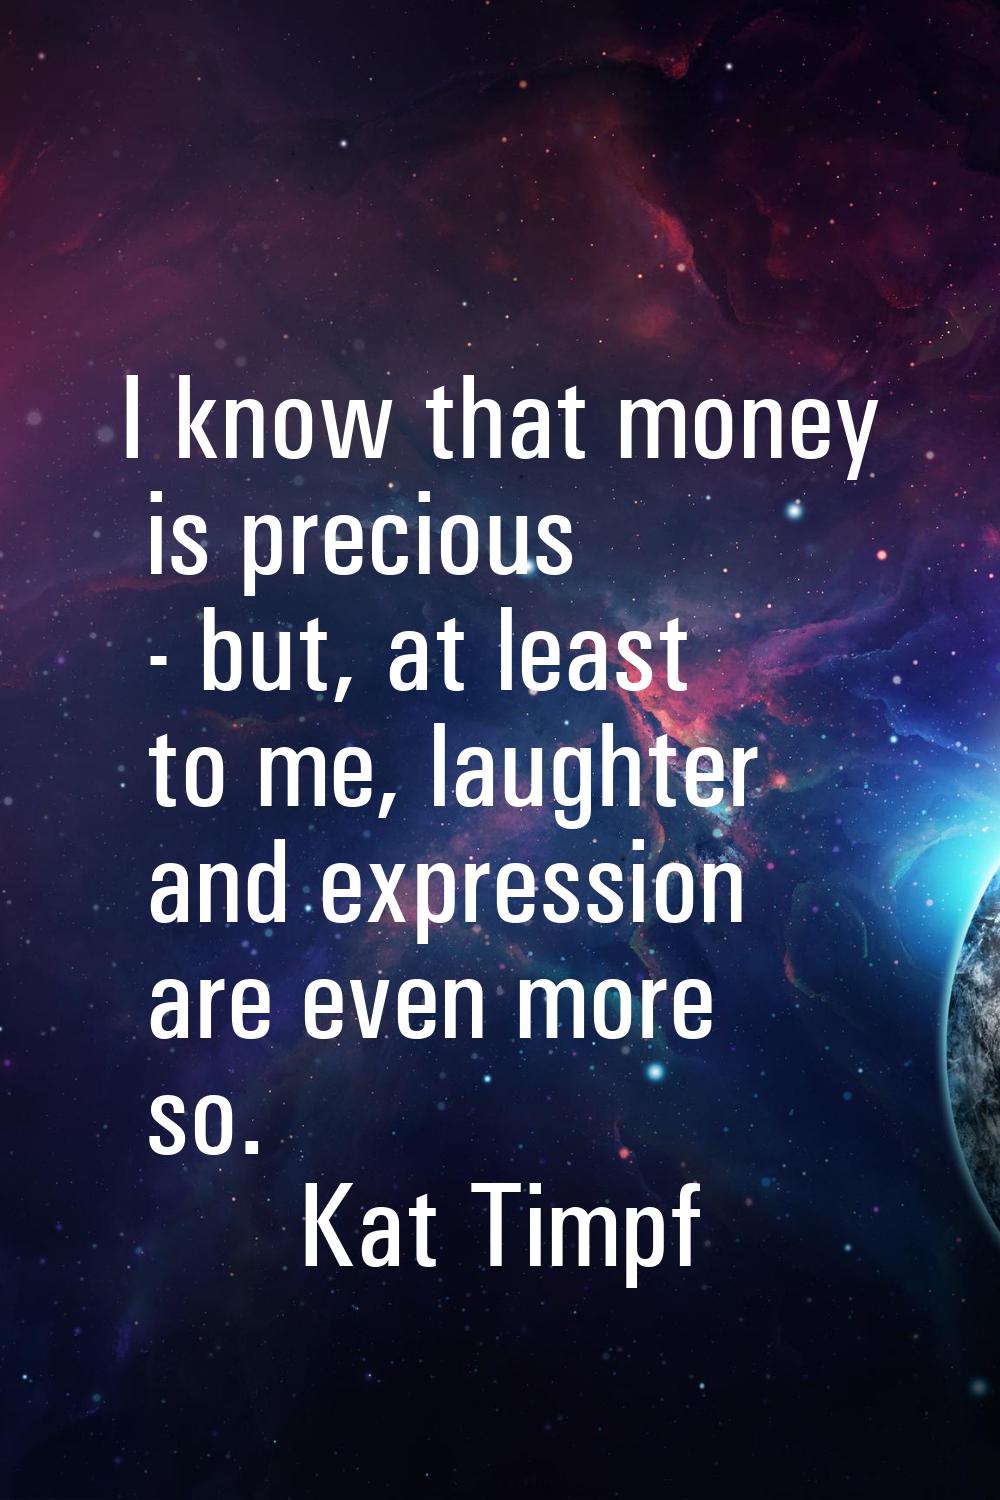 I know that money is precious - but, at least to me, laughter and expression are even more so.